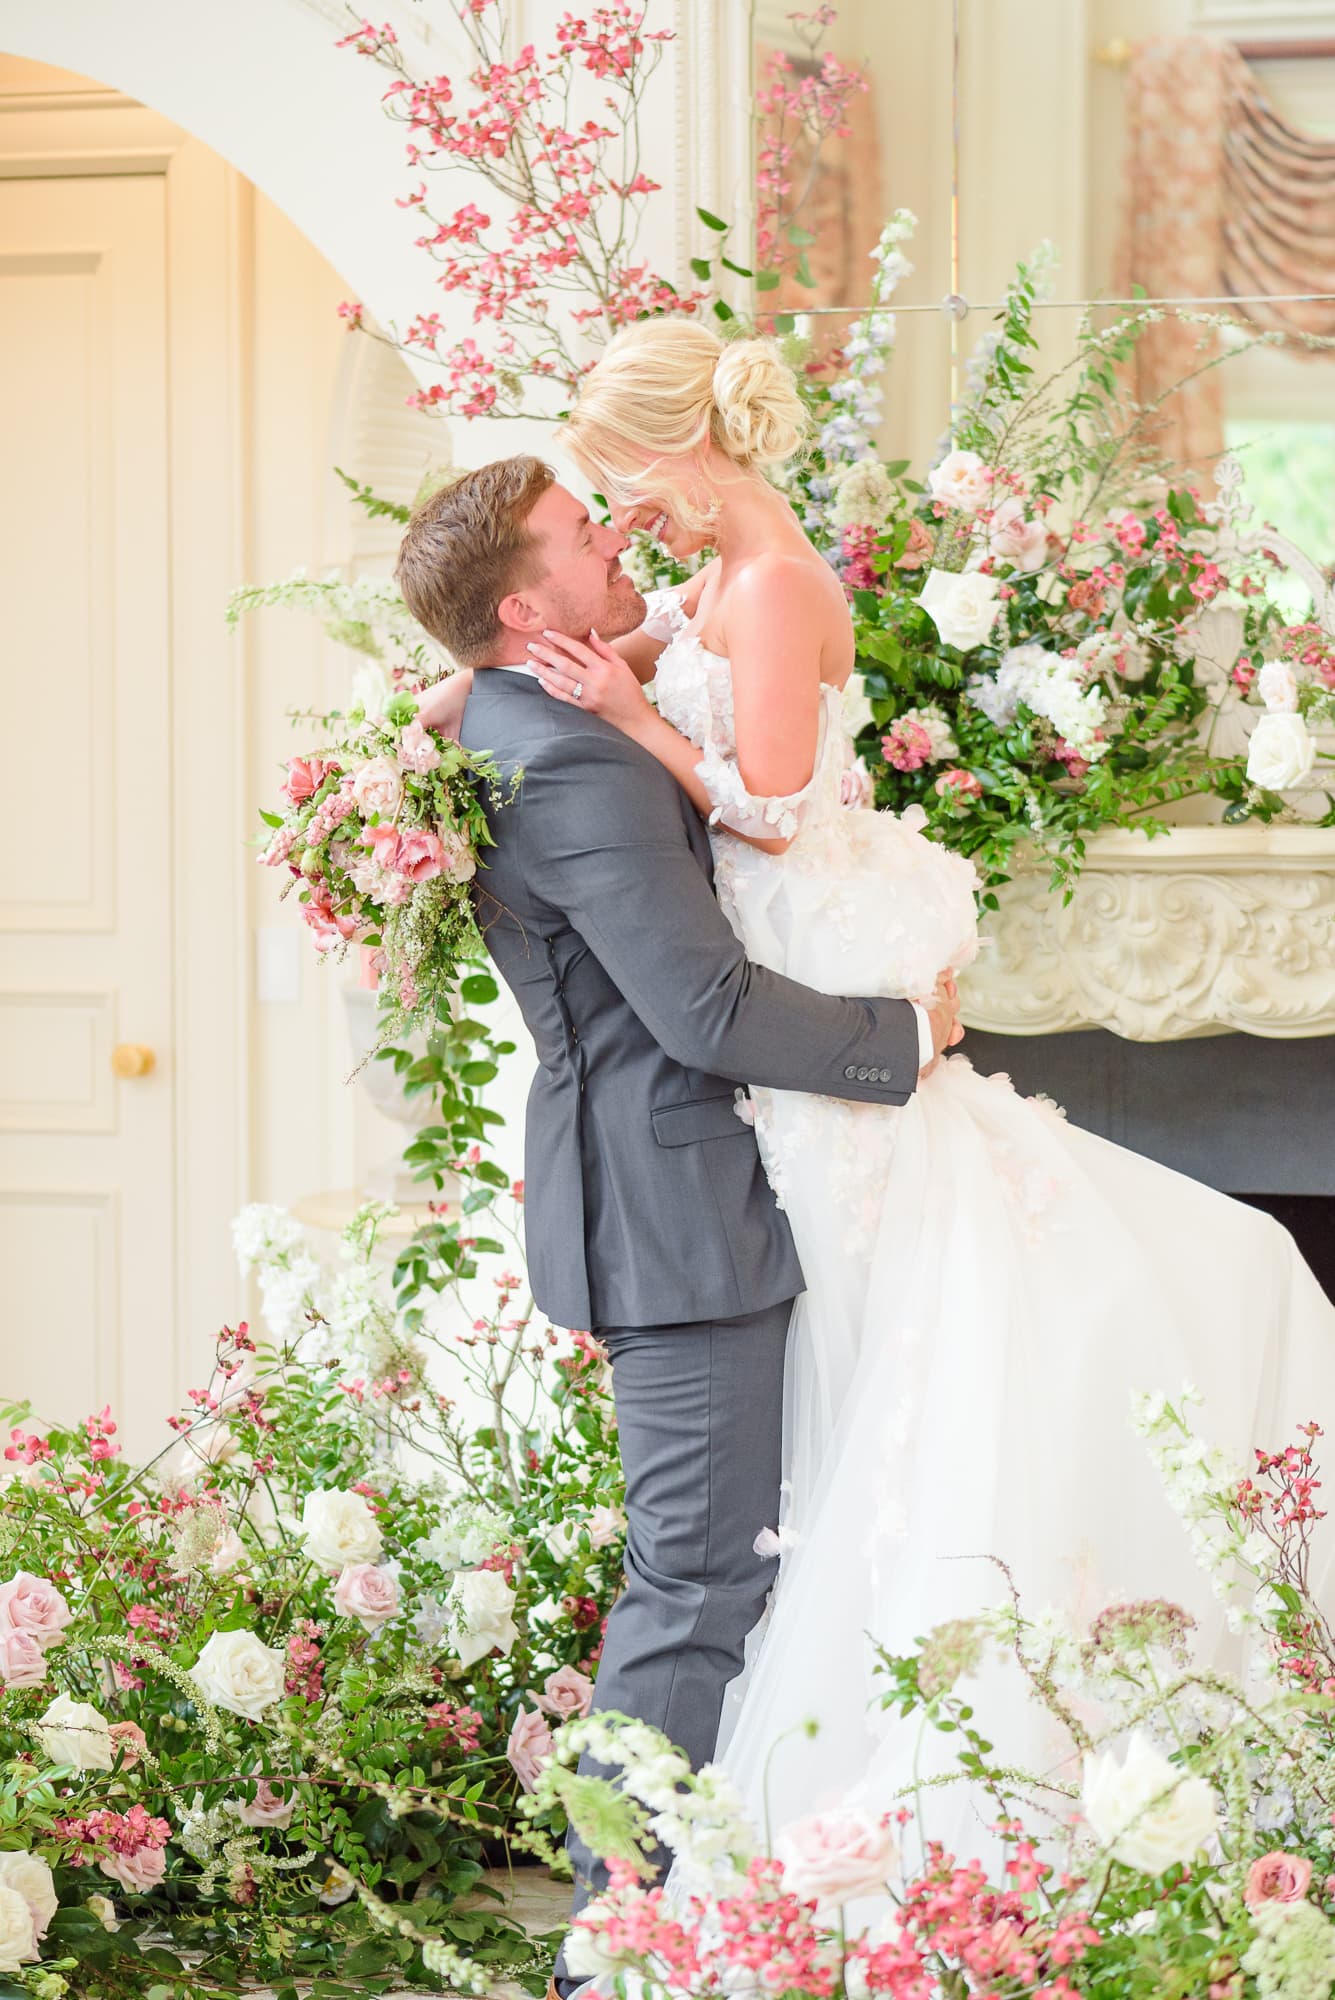 A bride gets lifted up by her husband during this flattering wedding pose.